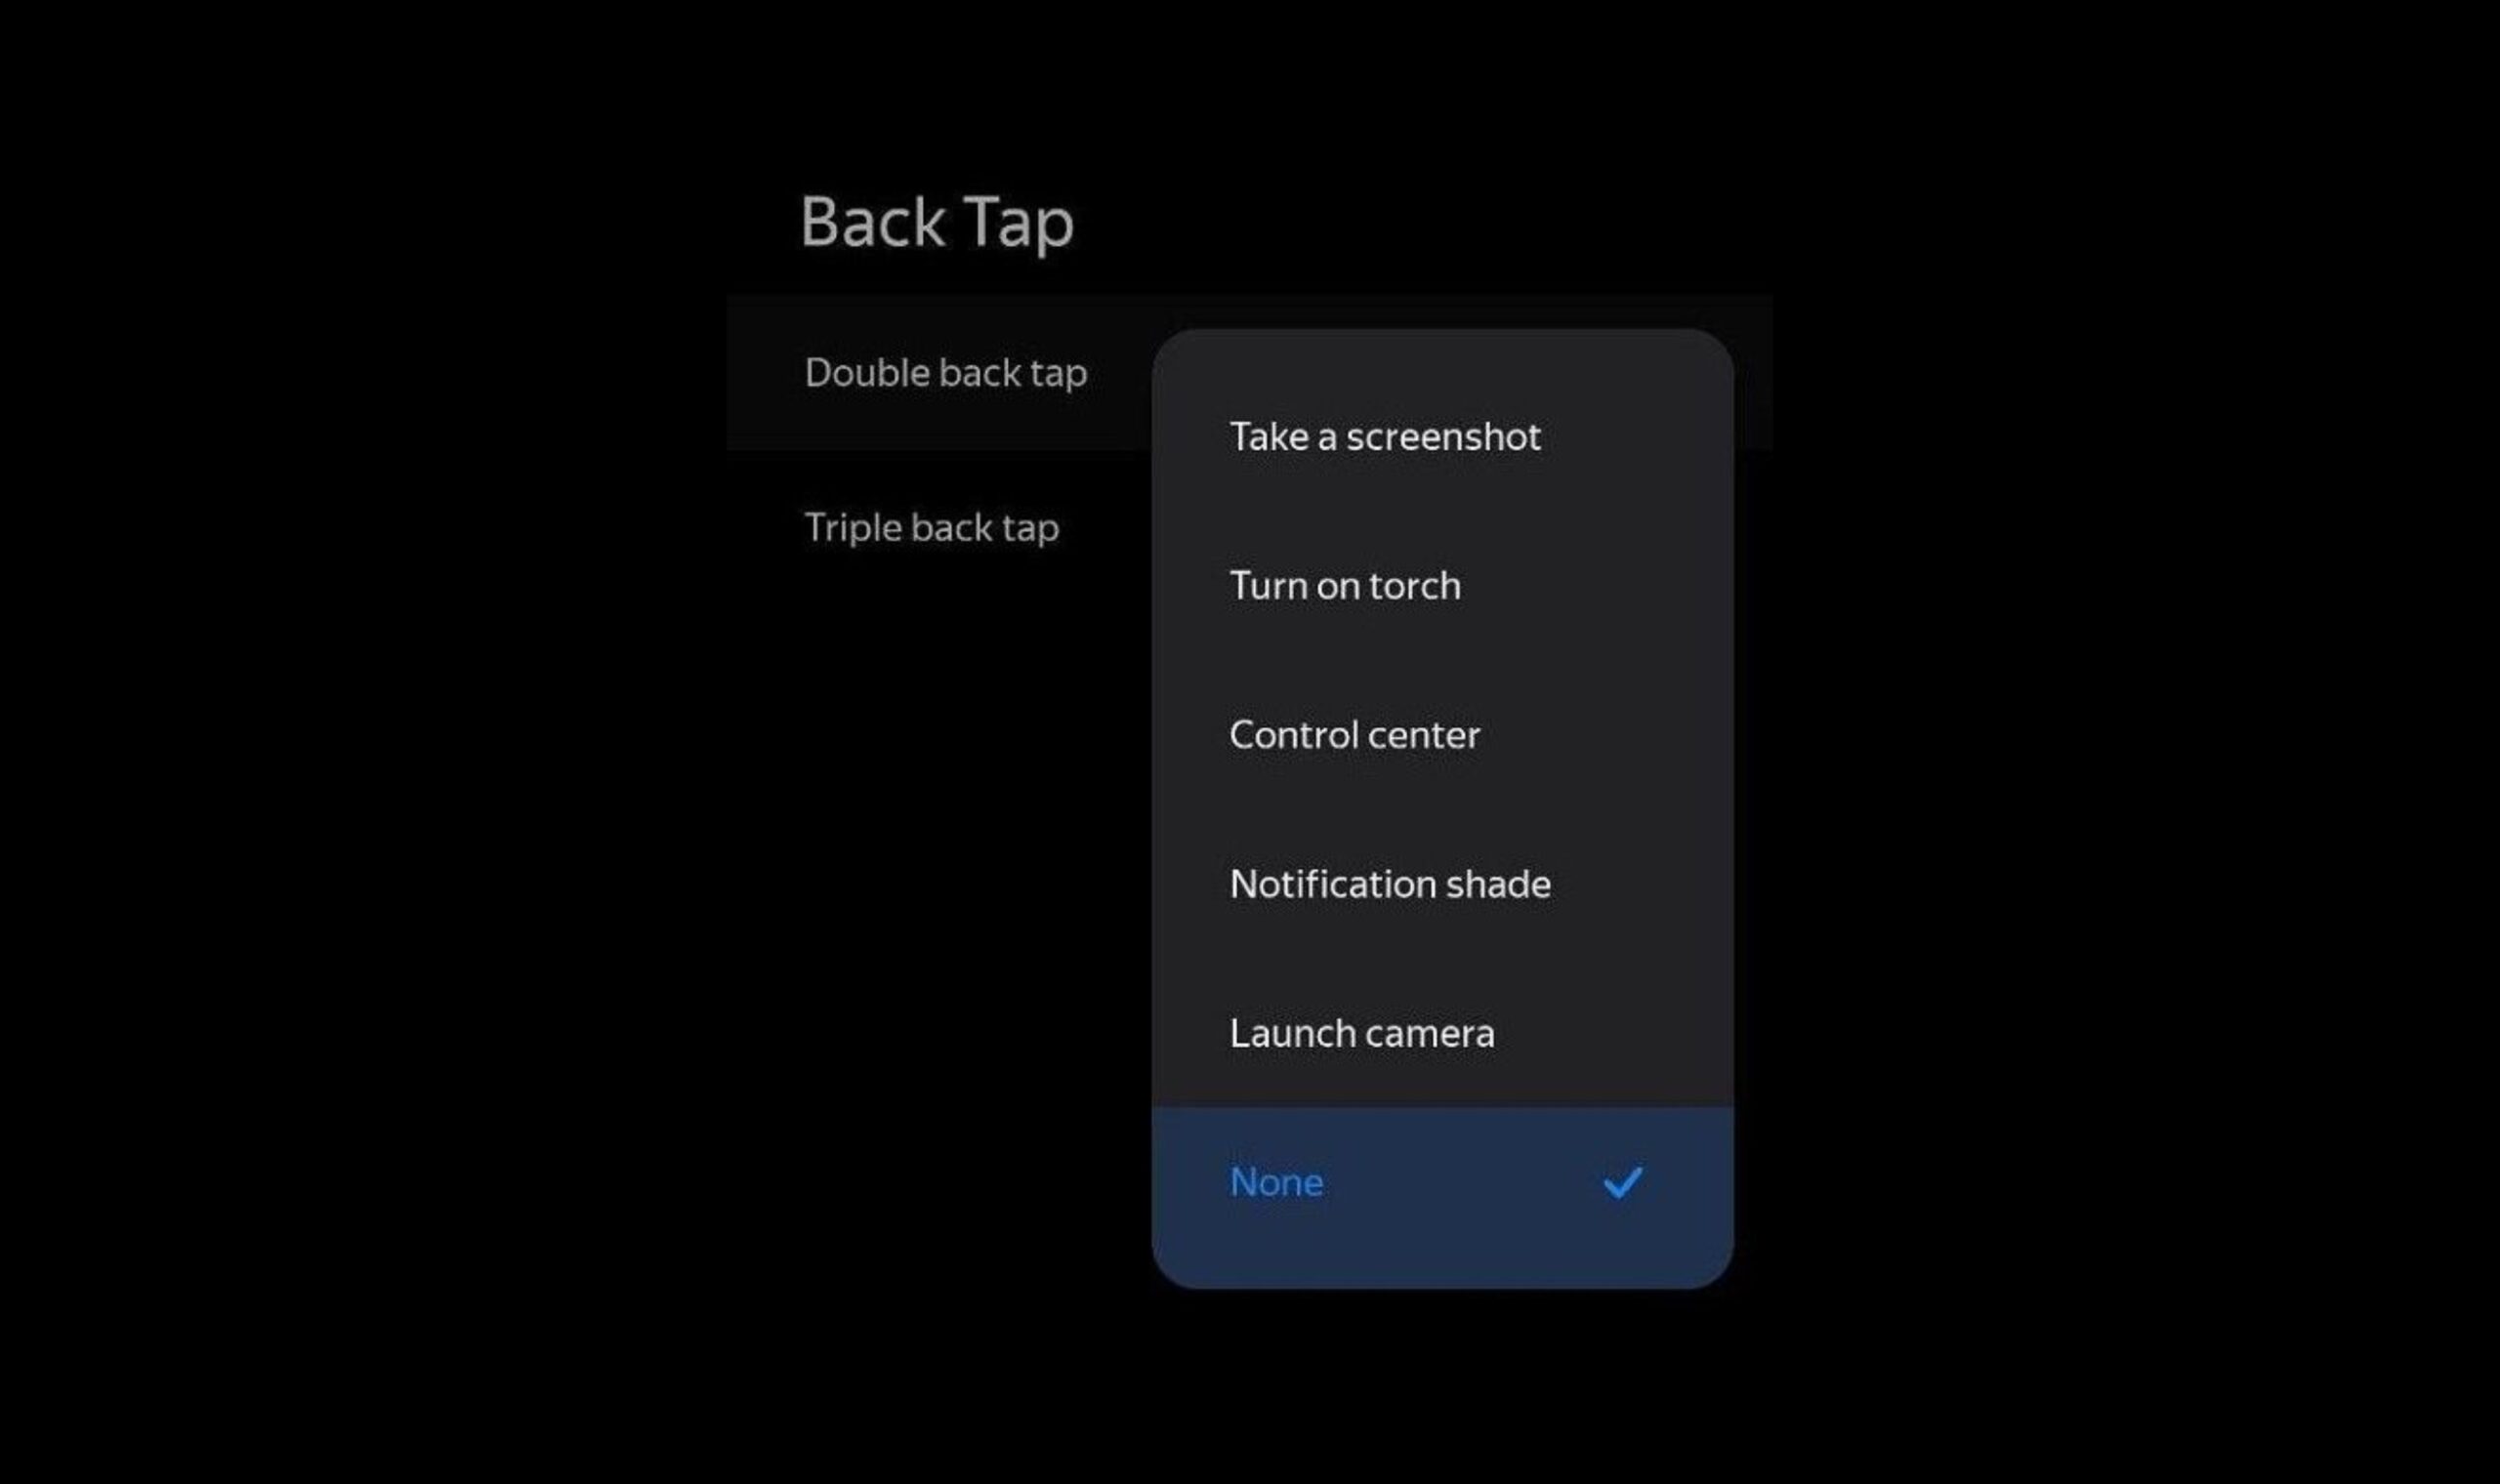 Xiaomi is working on “Back Tap” gesture for MIUI 12